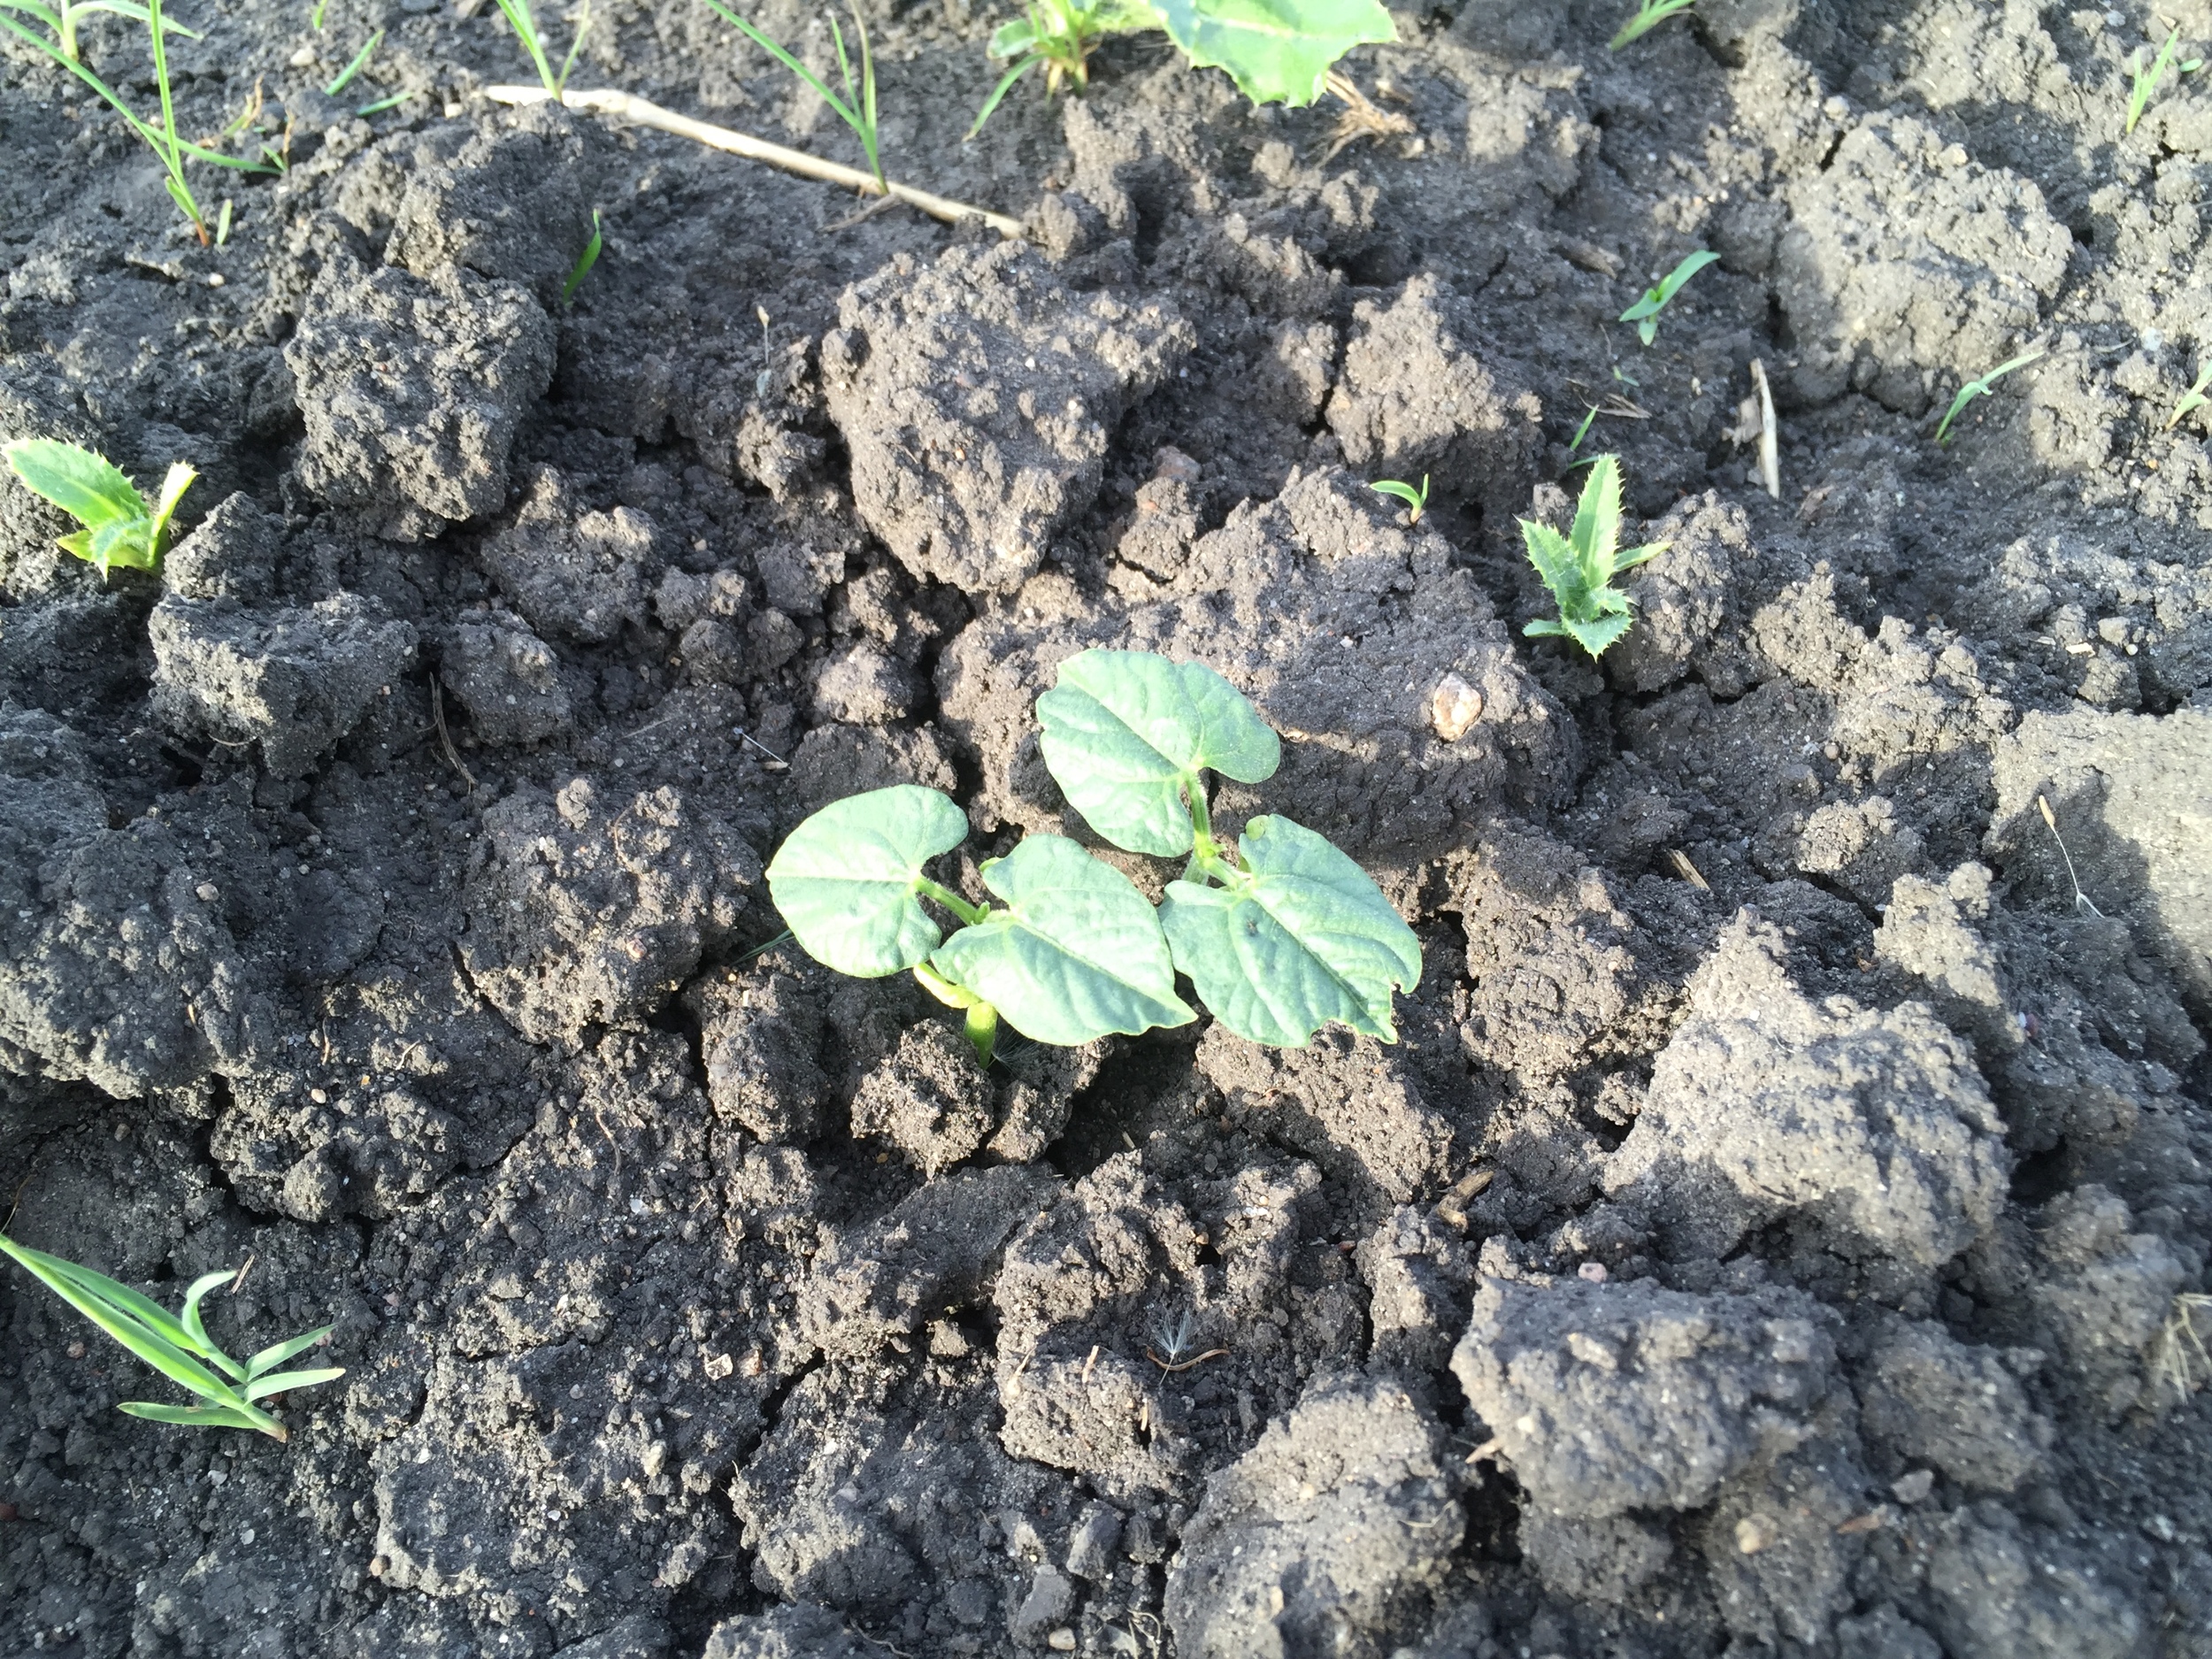  Green Beans emerging from the soil.   